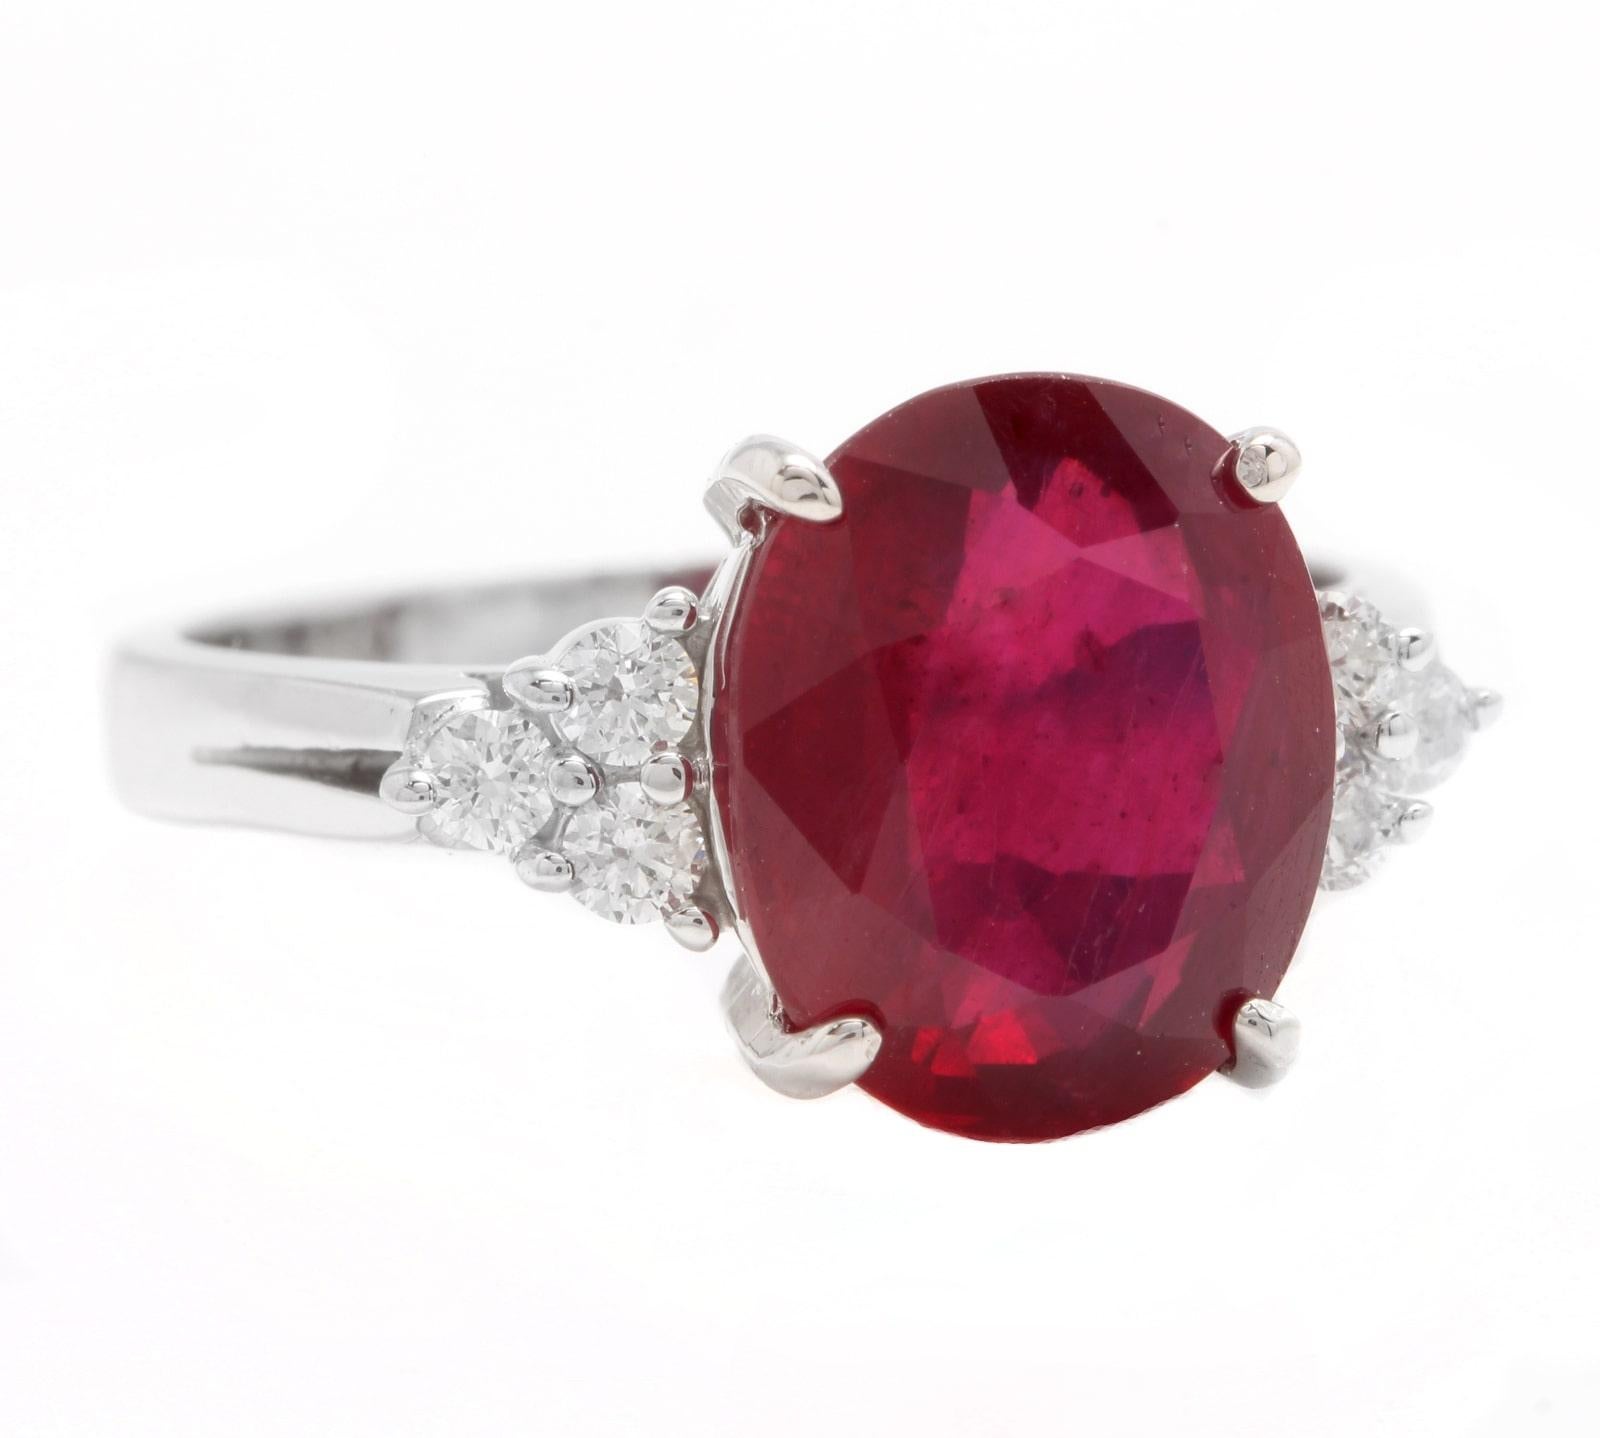 6.60 Carats Impressive Red Ruby and Diamond 14K White Gold Ring

Suggested Replacement Value $4,500.00

Total Red Ruby Weight is: 6.30 Carats 

Ruby Measures: 11x 9mm (Lead Glass Filled)

Natural Round Diamonds Weight: 0.30 Carats (color G-H /